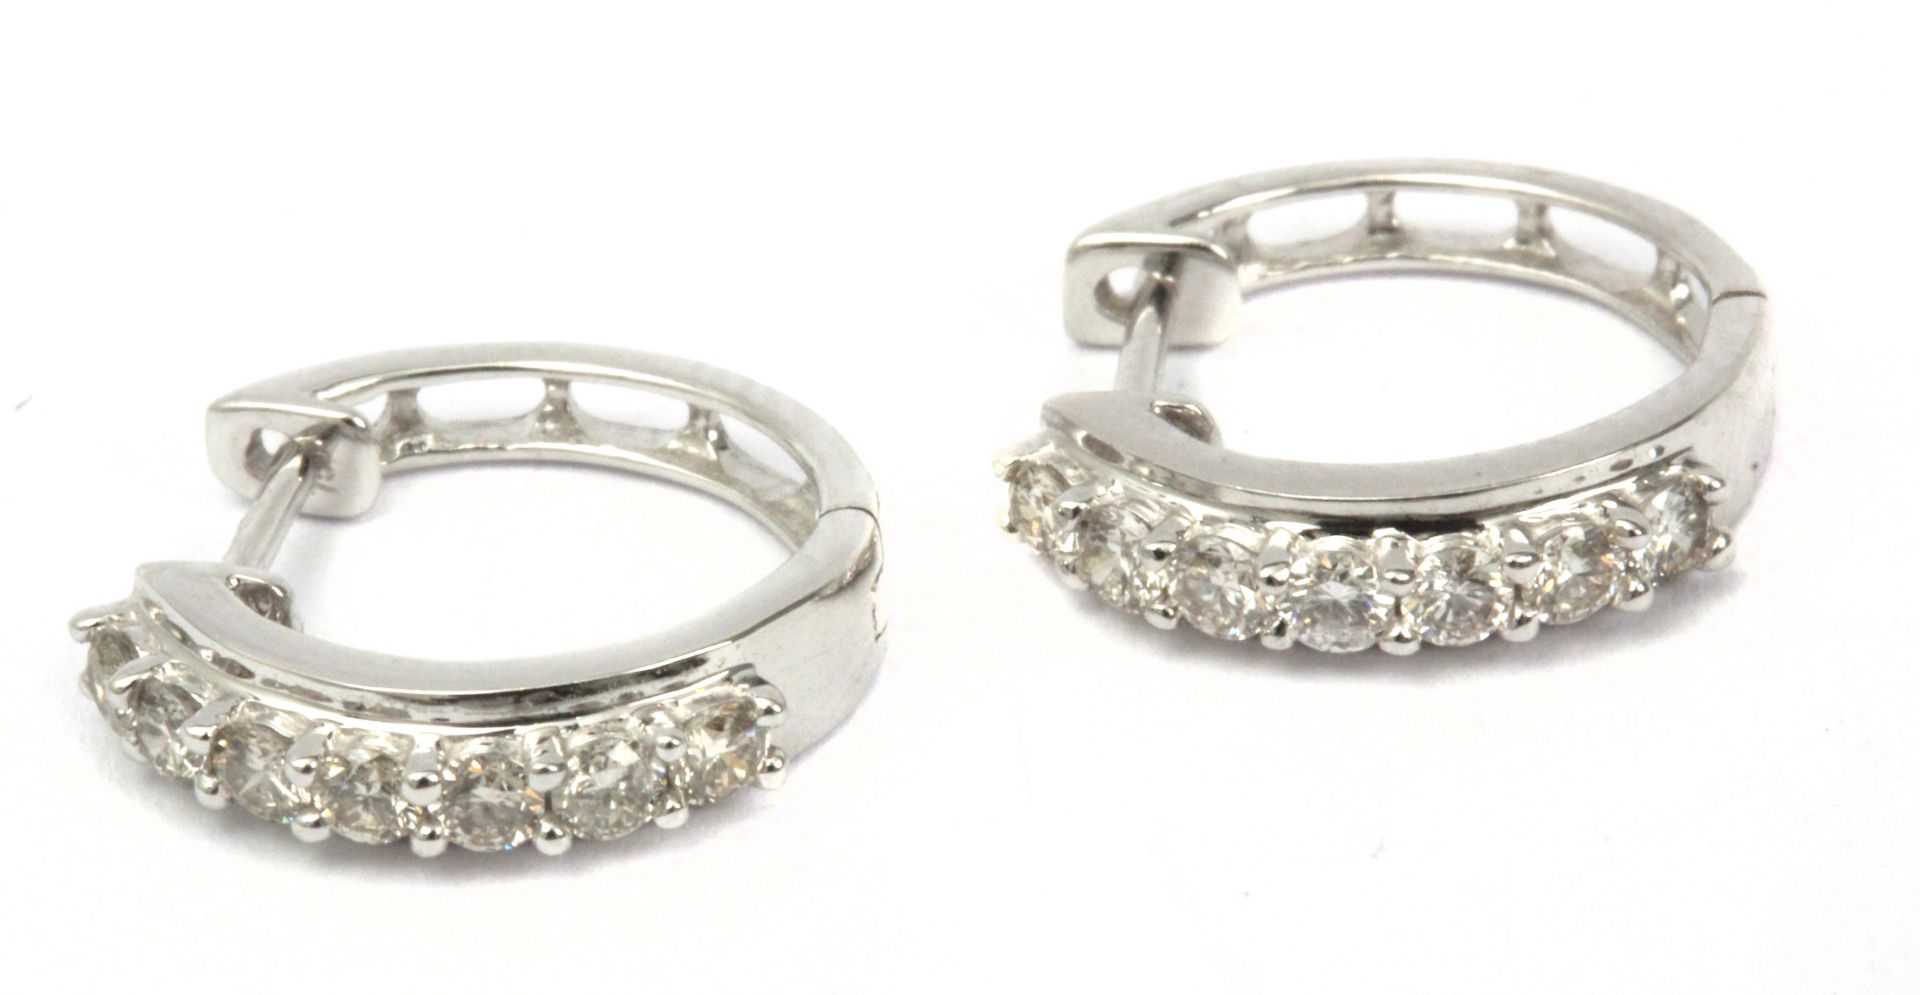 A pair of diamond hoop earrings with an 18k. white gold setting and brilliant cut diamonds